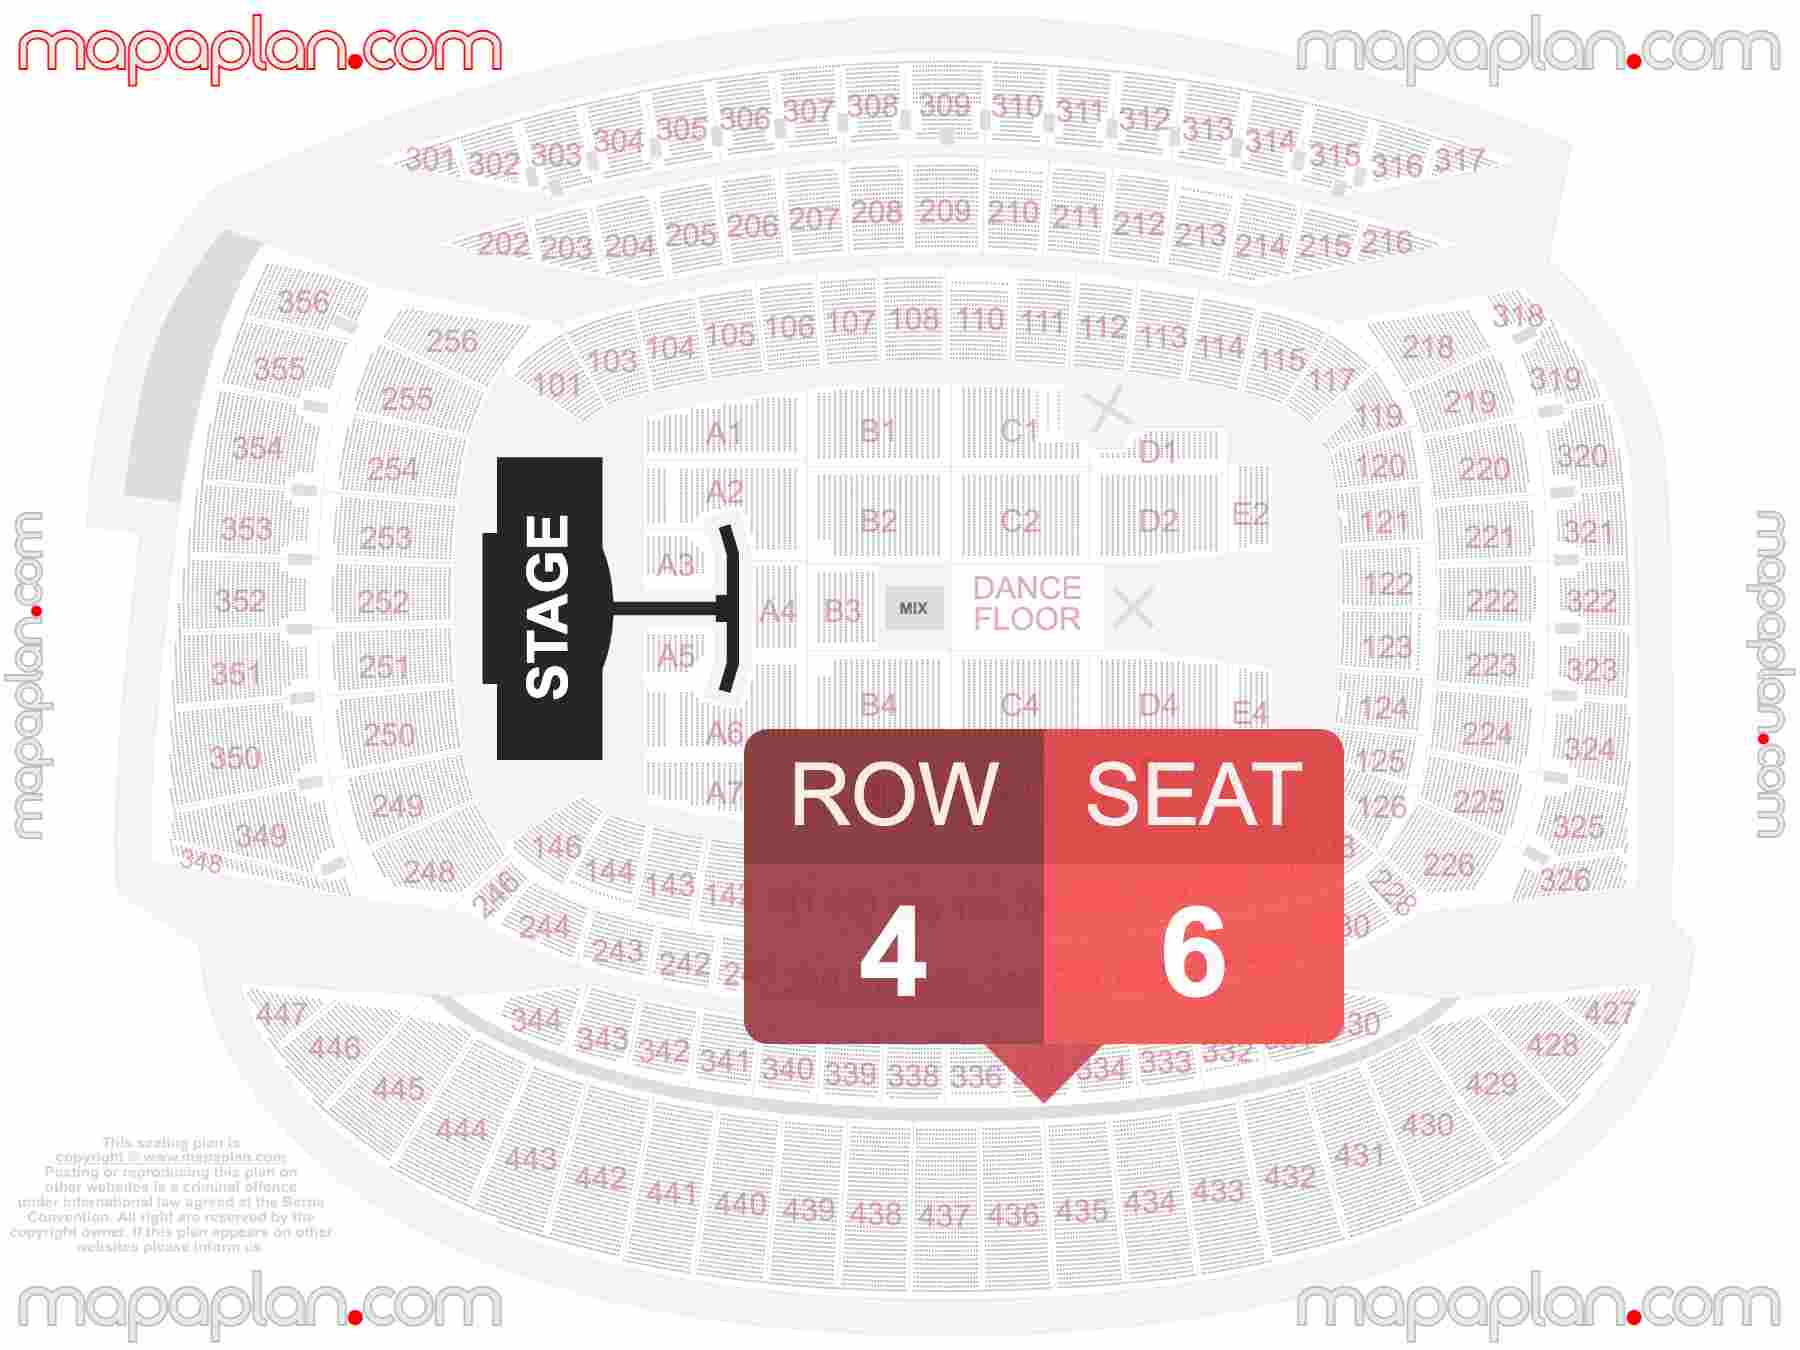 Chicago Soldier Field seating chart Concert with extended catwalk runway B-stage seating chart with exact section numbers showing best rows and seats selection 3d layout - Best interactive seat finder tool with precise detailed location data